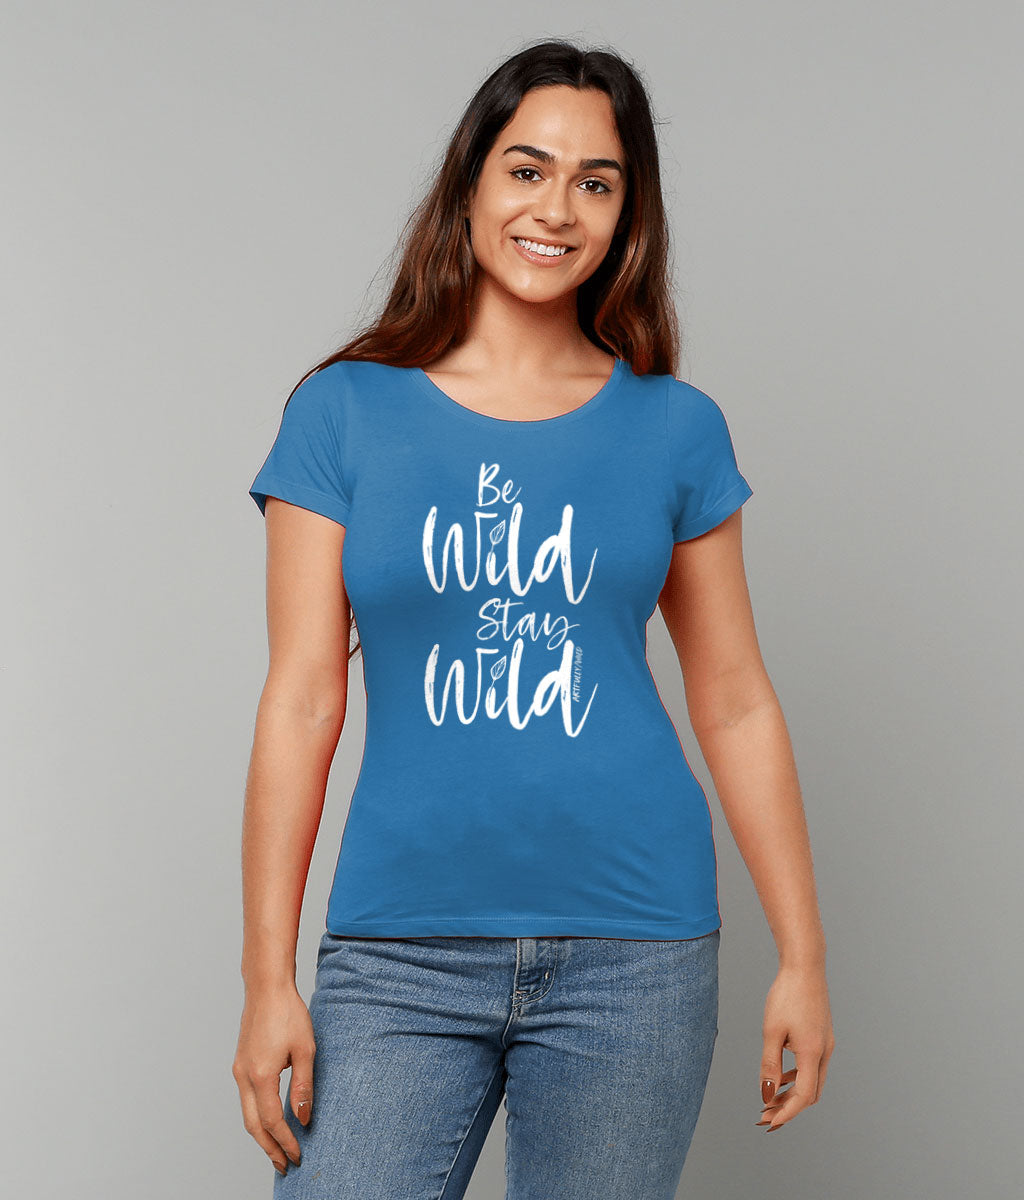 Female model wearing ‘BE WILD STAY WILD’ Women's Royal Blue Fitted T-Shirt. Eco-friendly organic cotton. White slogan print with water-based inks.